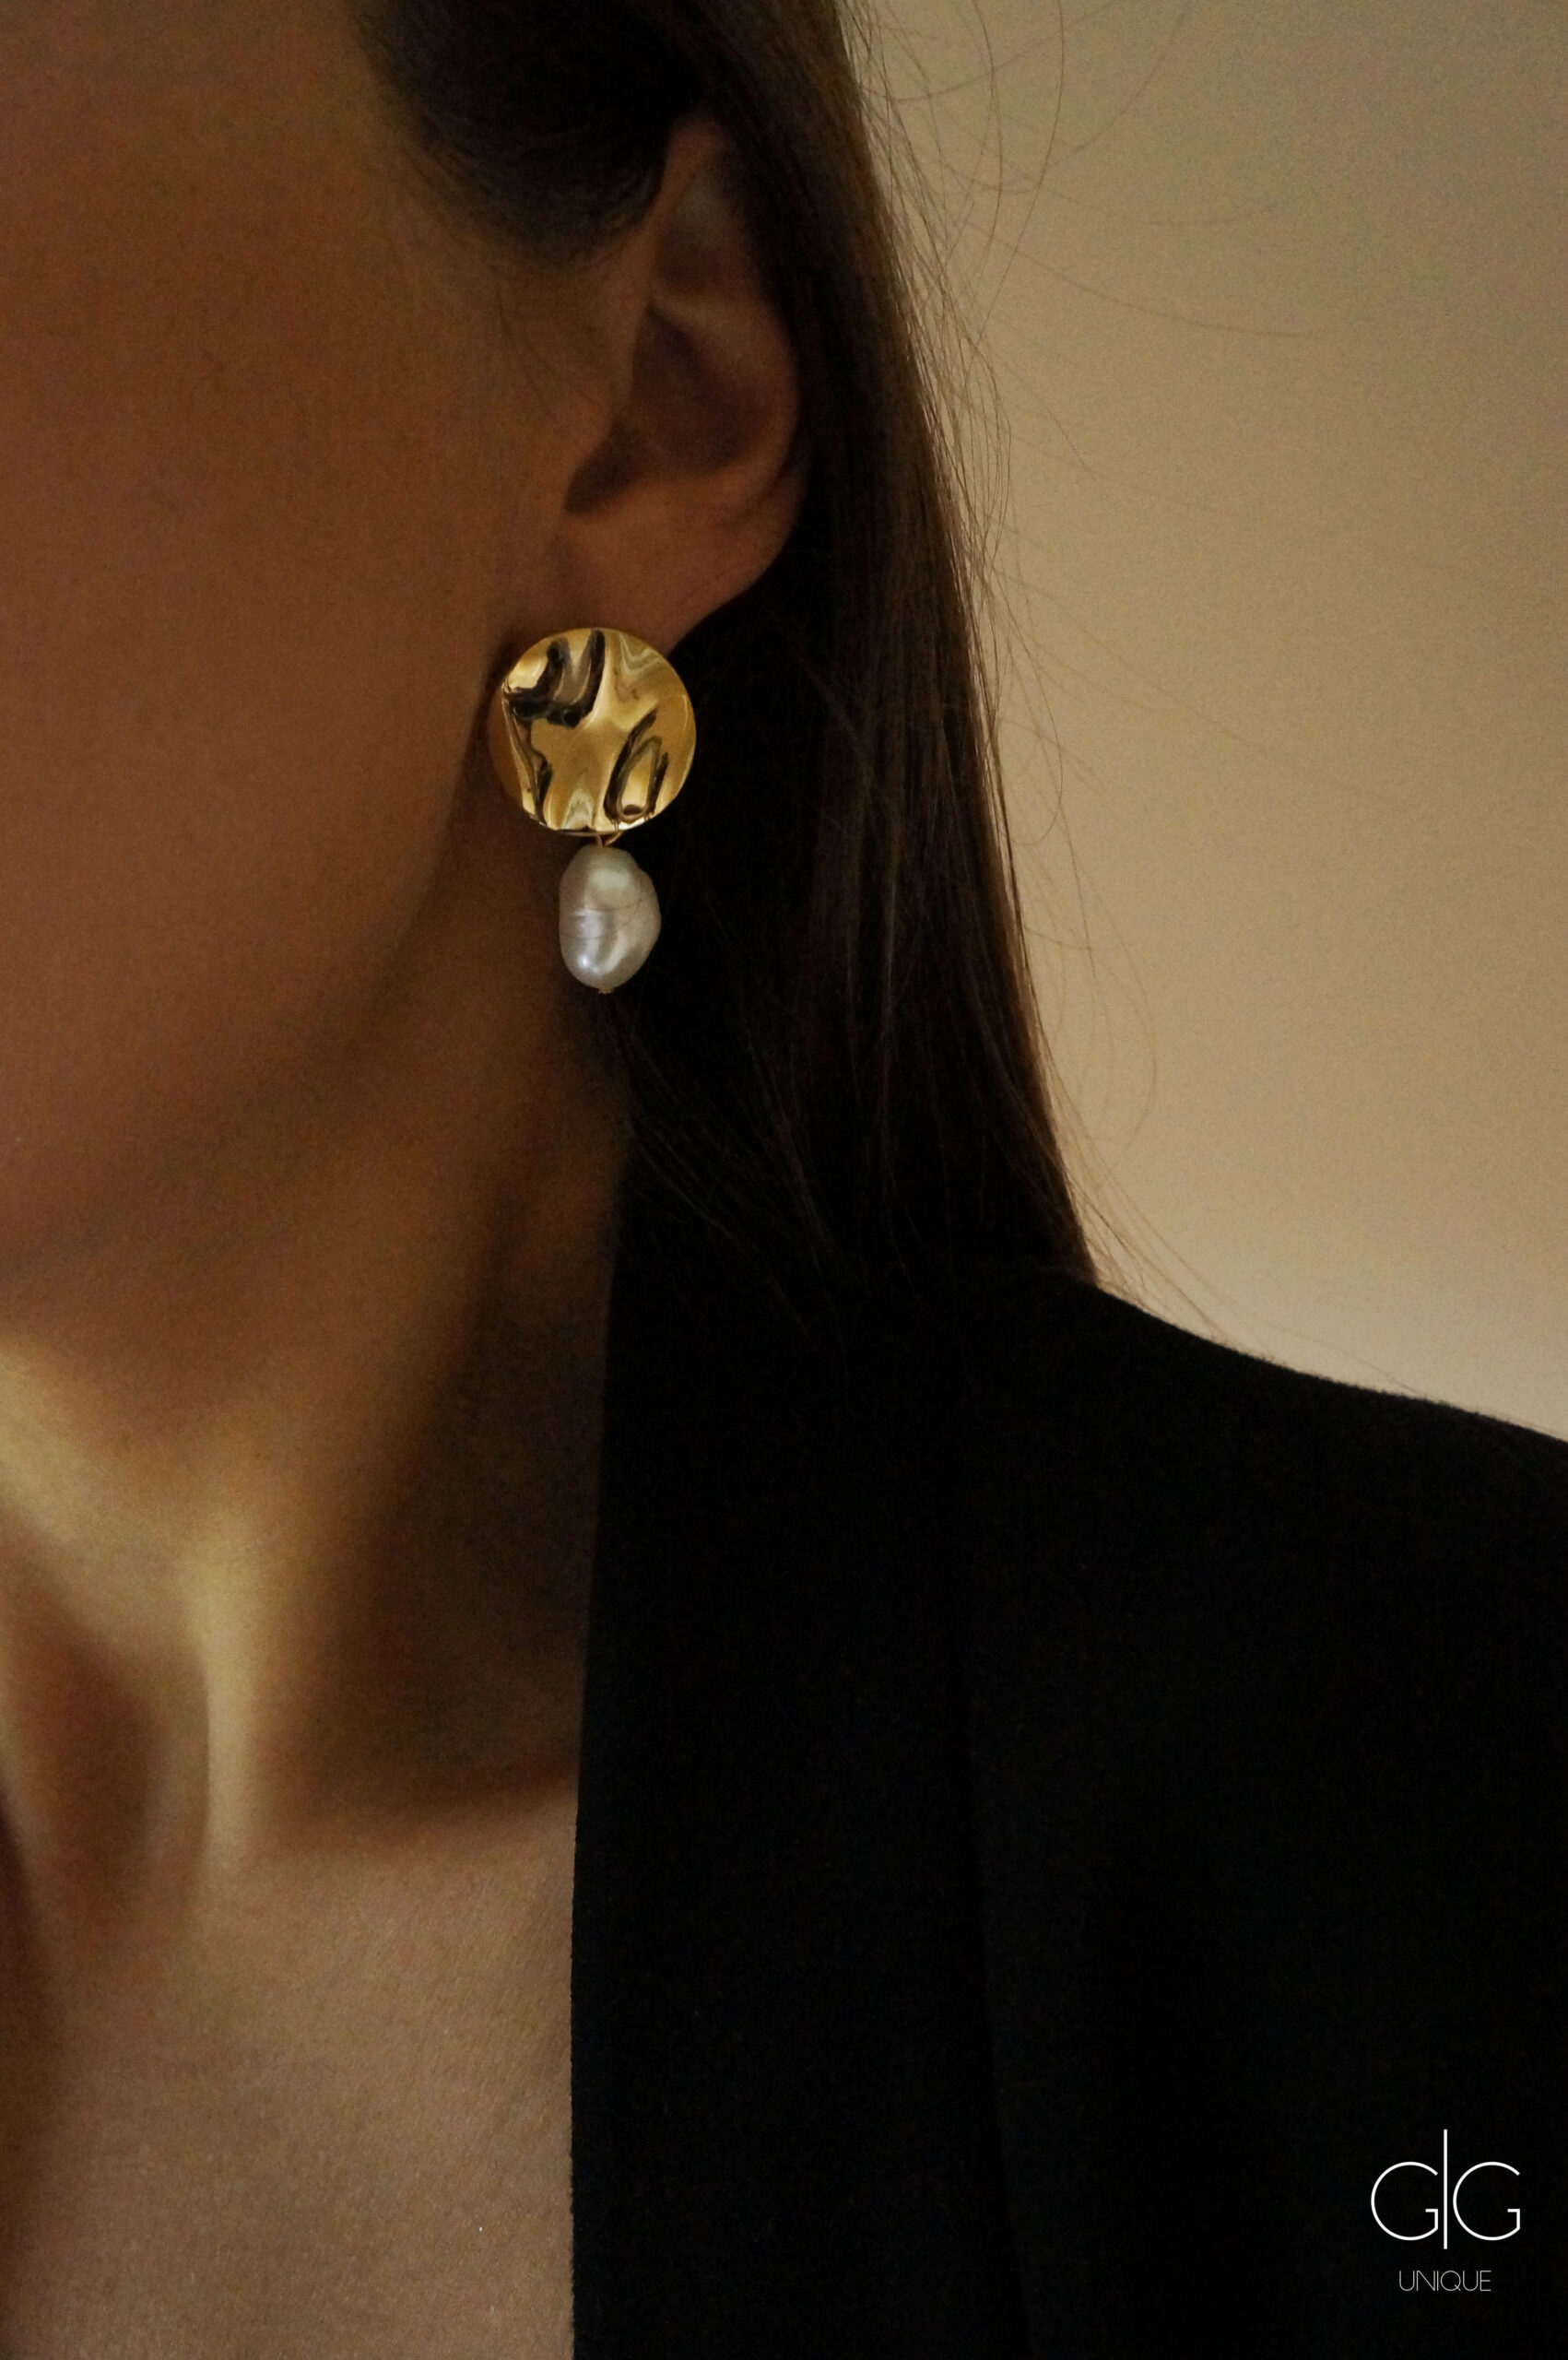 Round gold plate earrings with pearls - GG UNIQUE